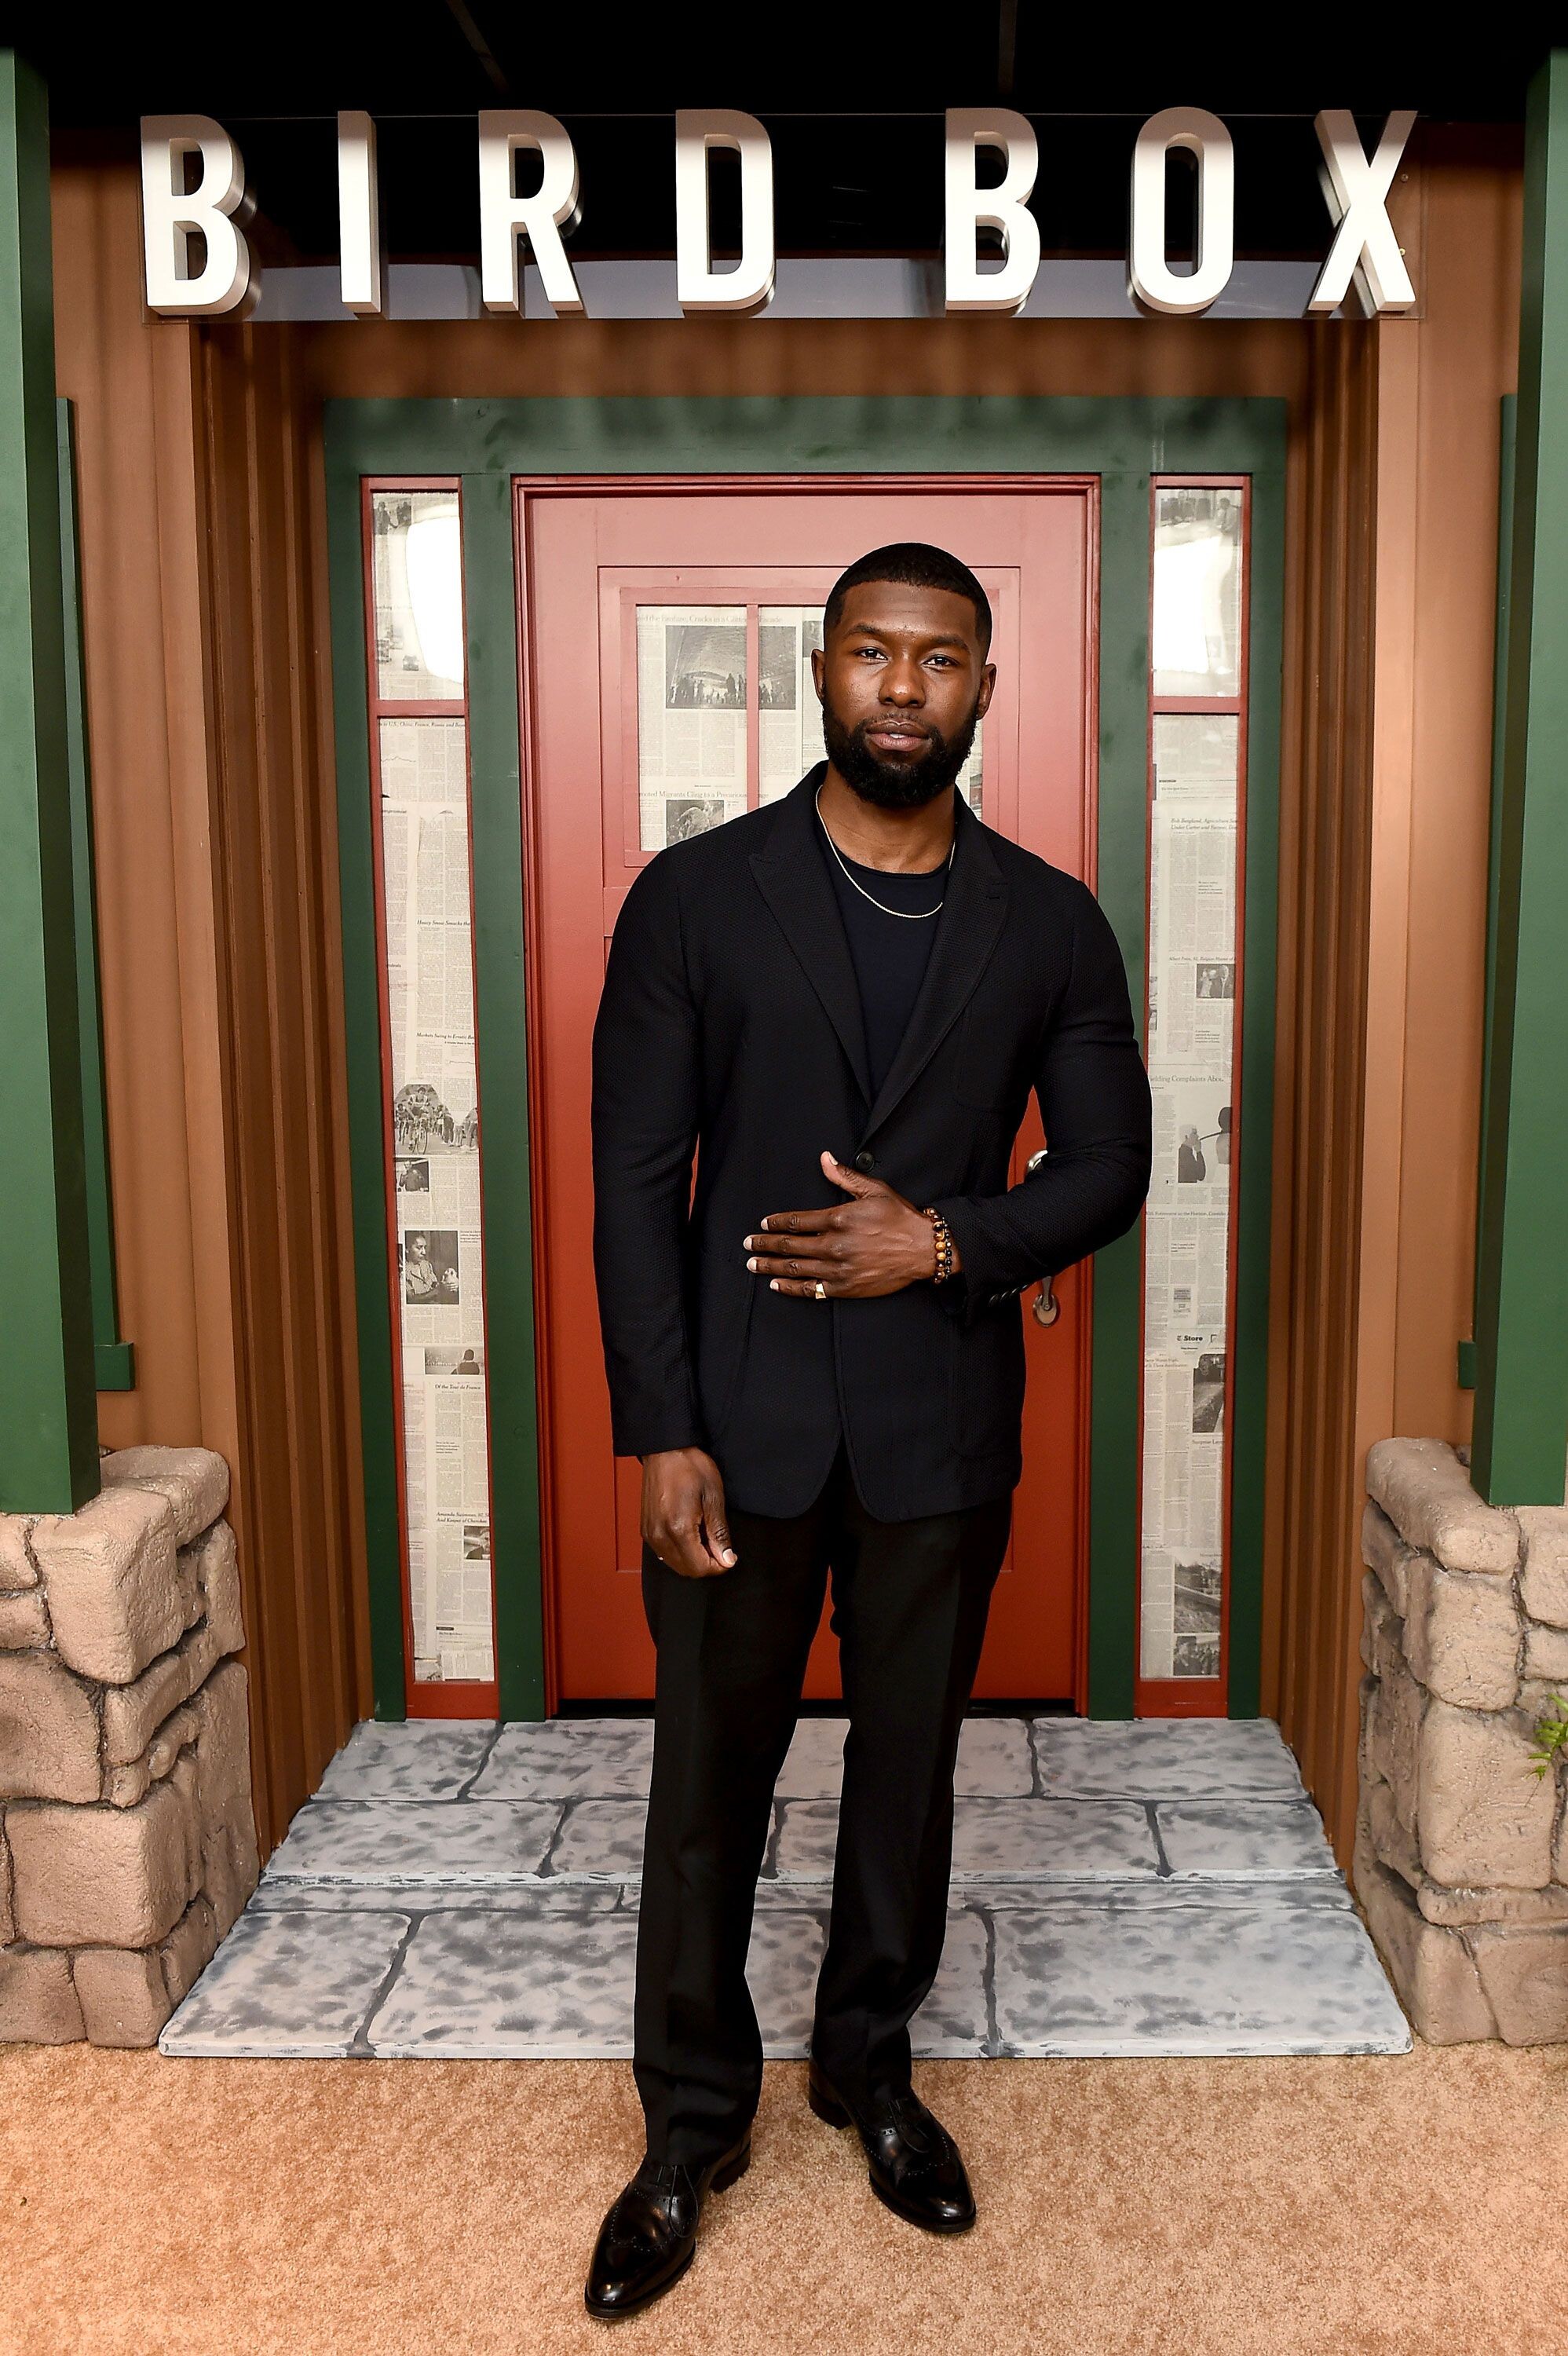 Bird Box (Movie 2018): Trevante Rhodes at the premiere of an American thriller film, Tom - the secondary character. 2000x3000 HD Wallpaper.